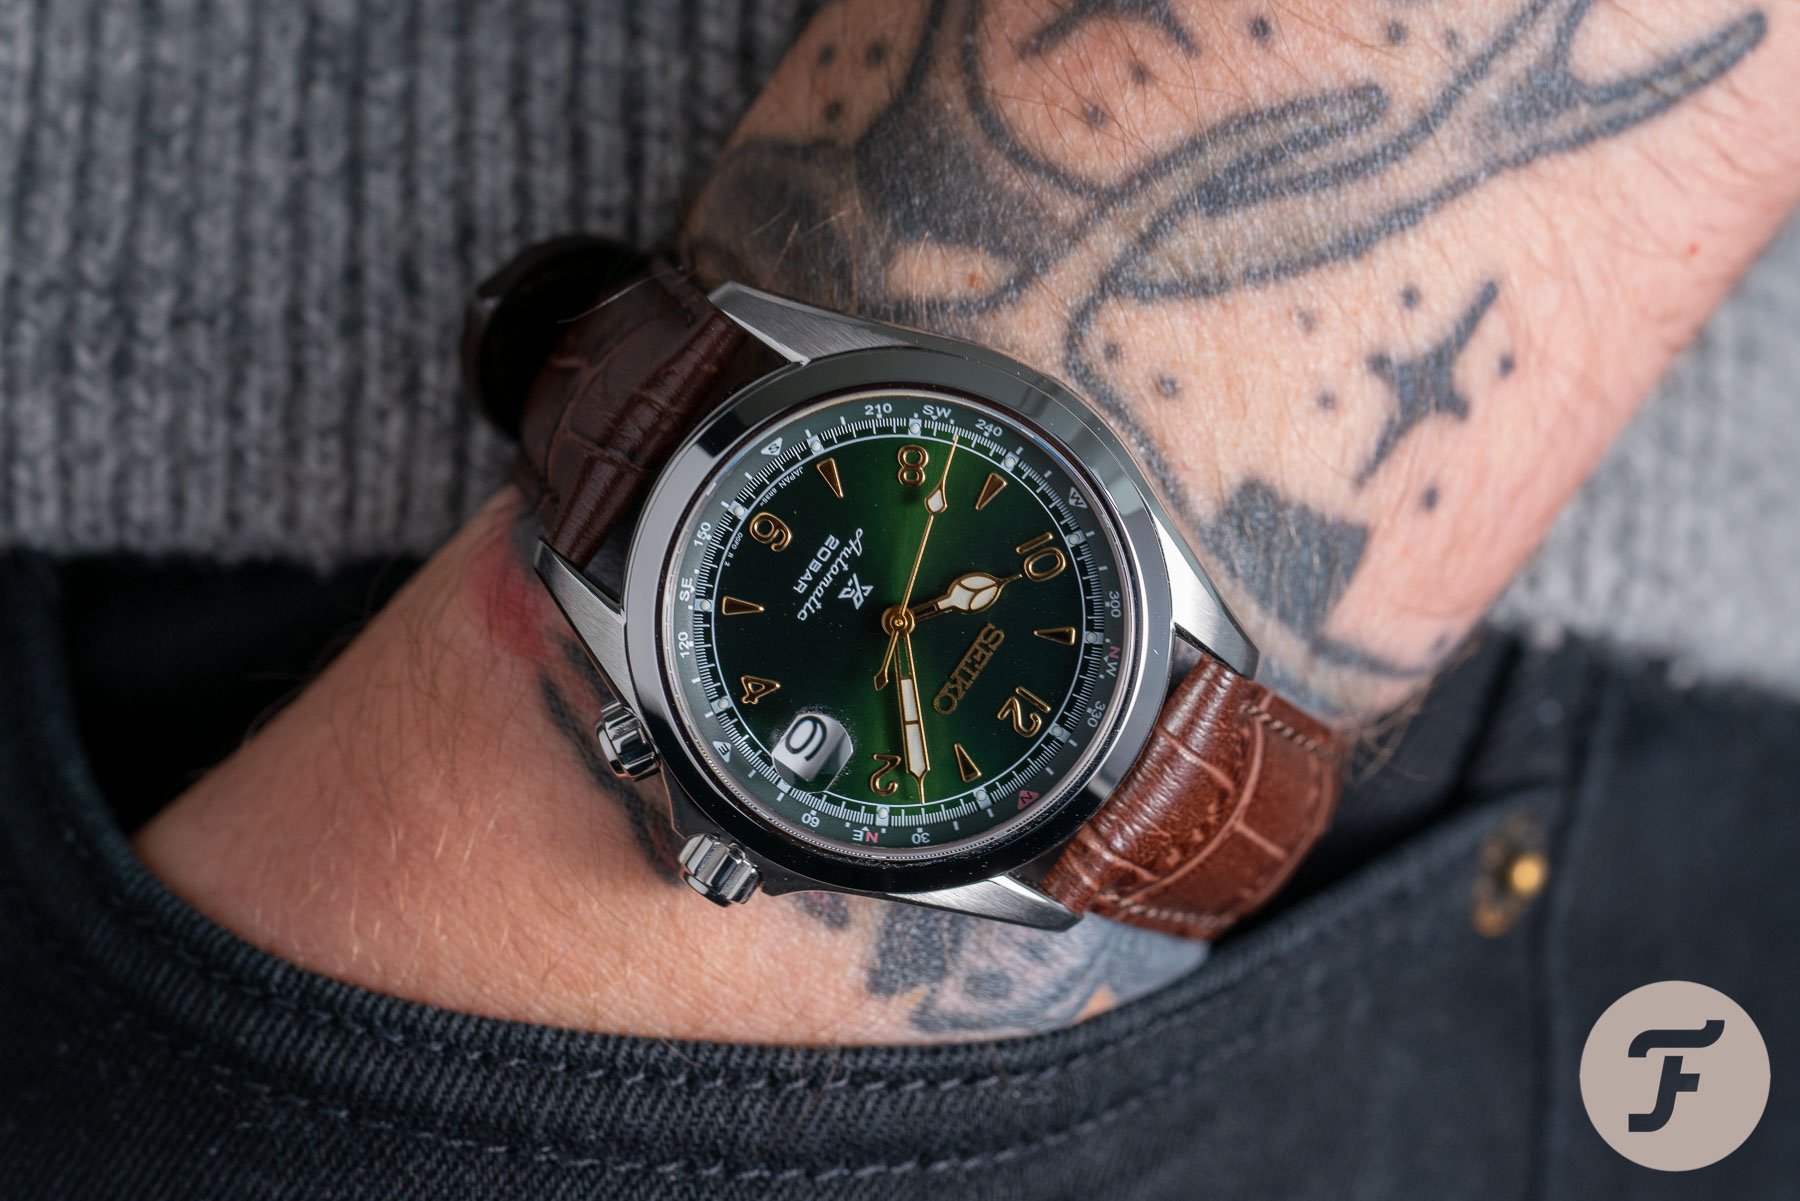 A Look Back On The Modern Seiko Alpinist